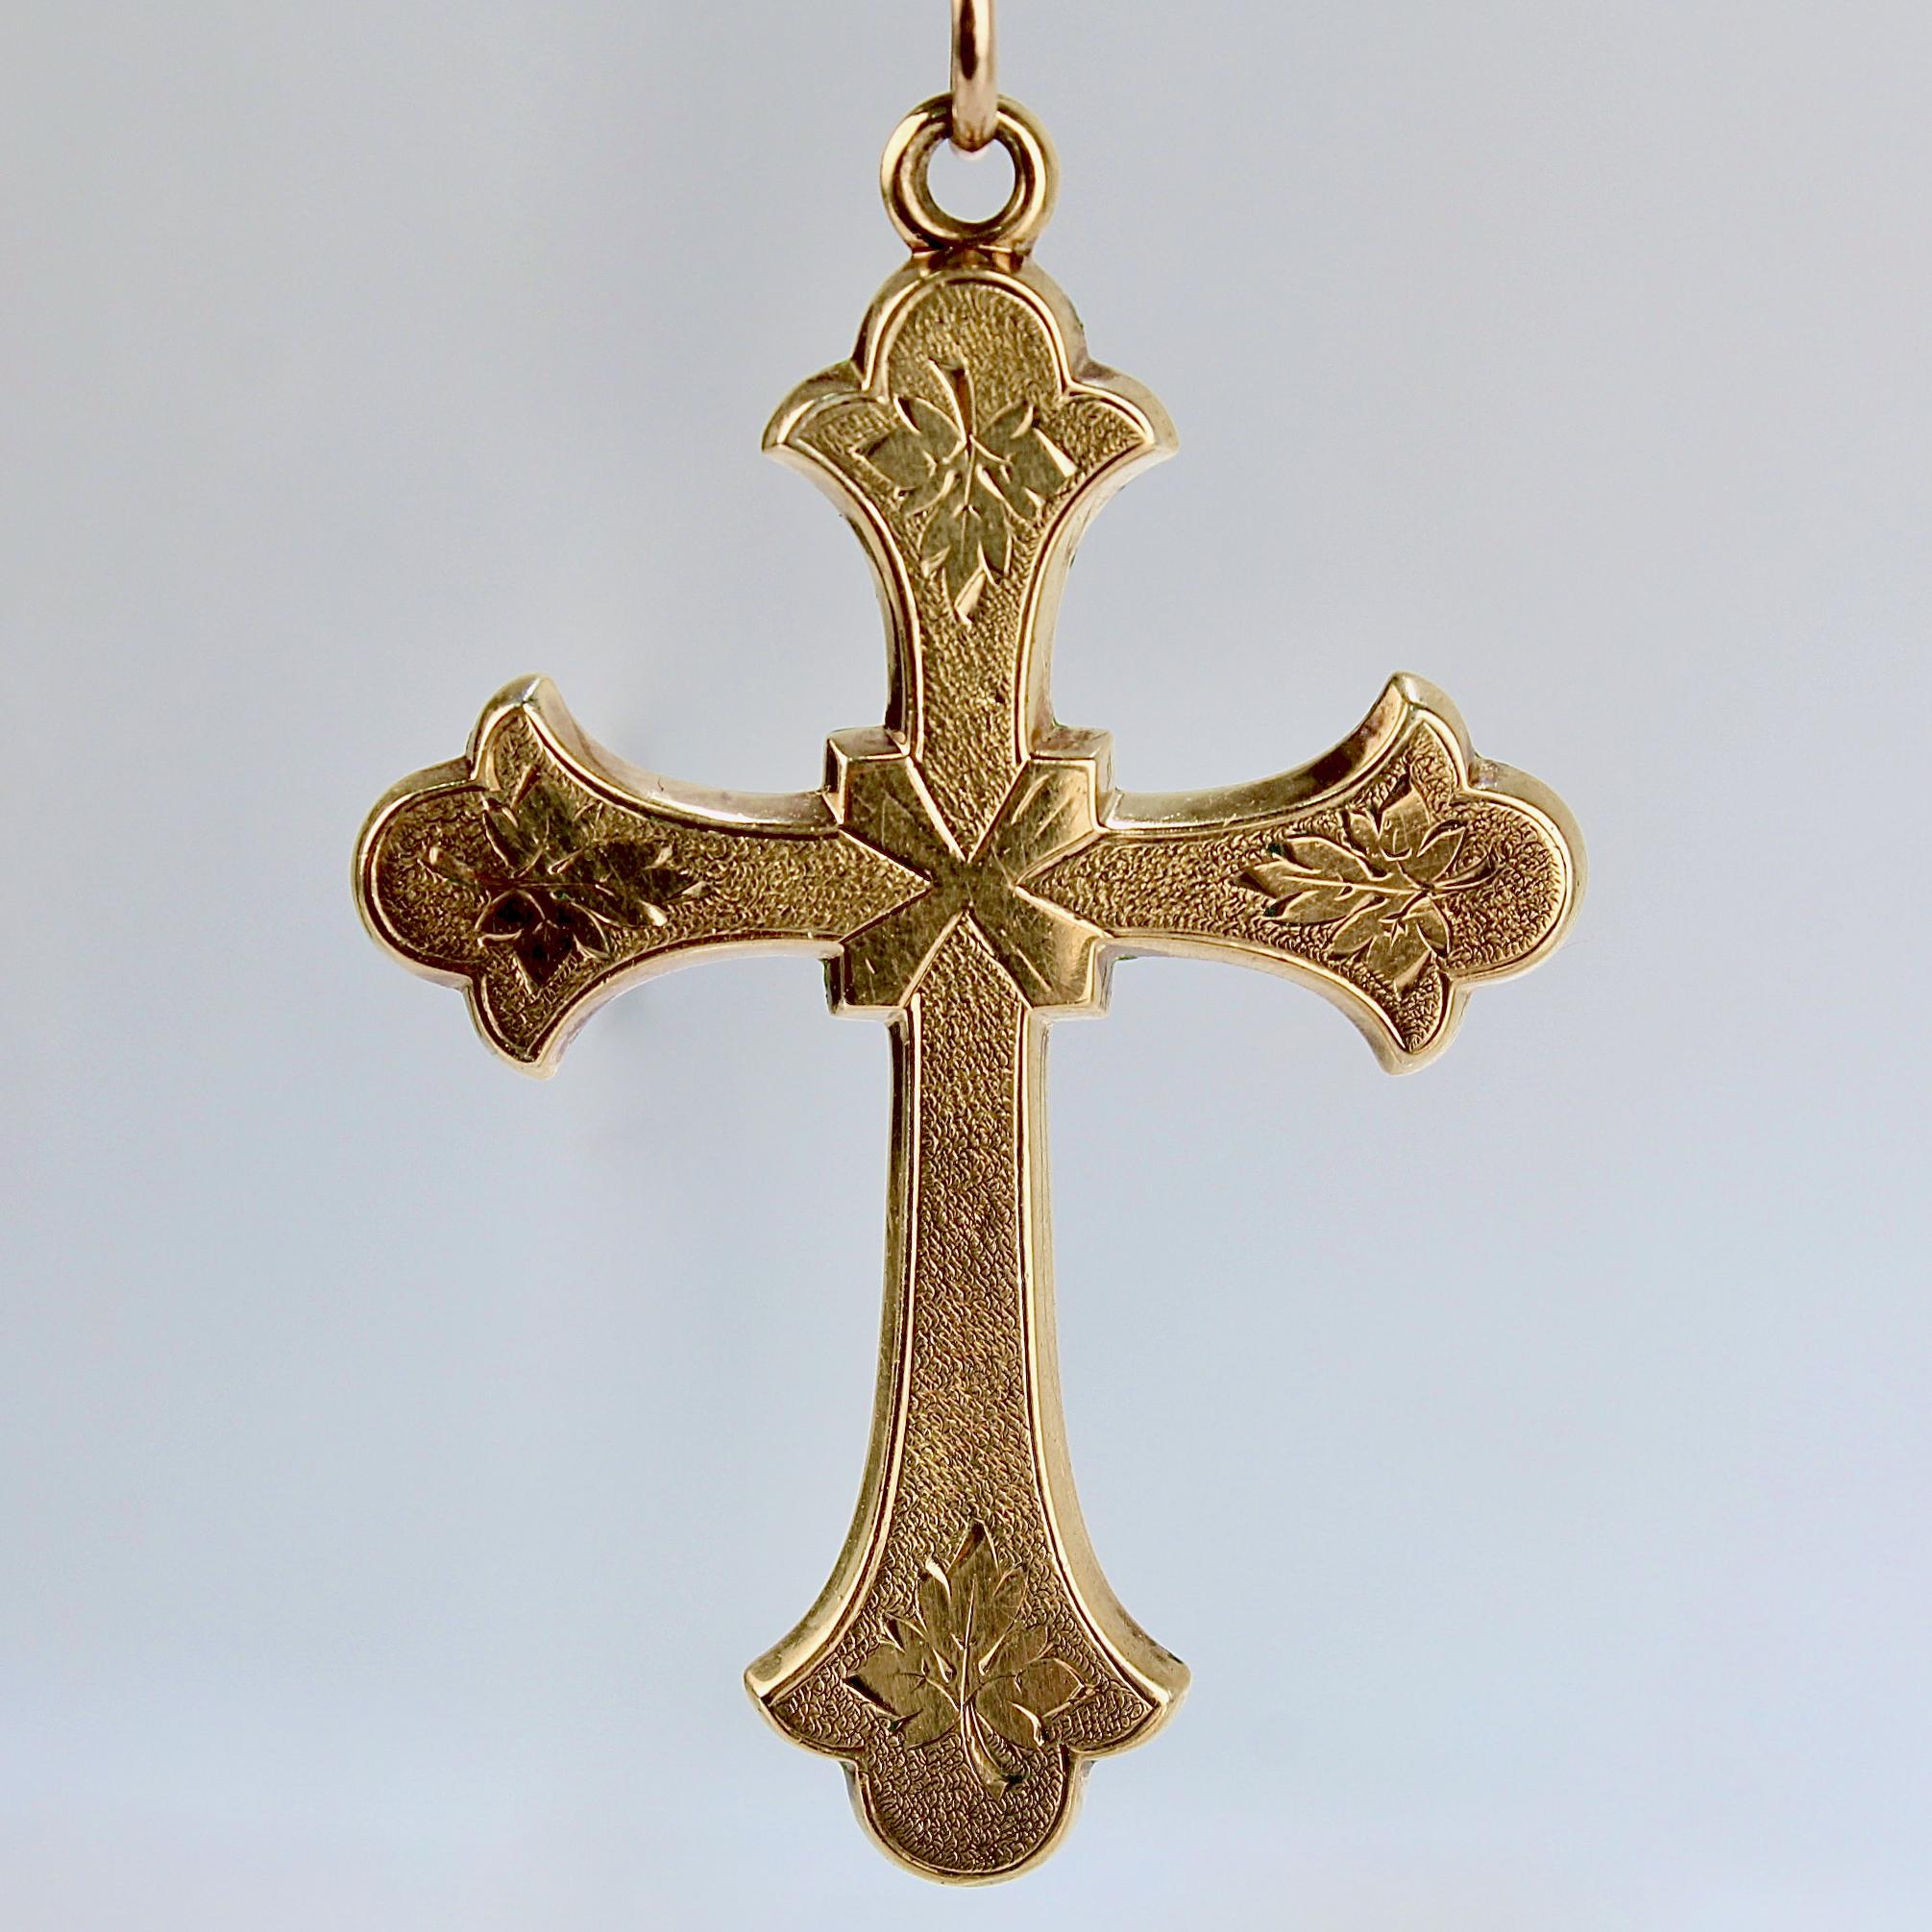 A very fine antique Victorian gold cross or crucifix.

With engraved and textured decoration on a hollow bodied cross.

Simply a beautiful antique cross pendant! 

Date:
19th Century

Overall Condition:
It is in overall good, as-pictured, used